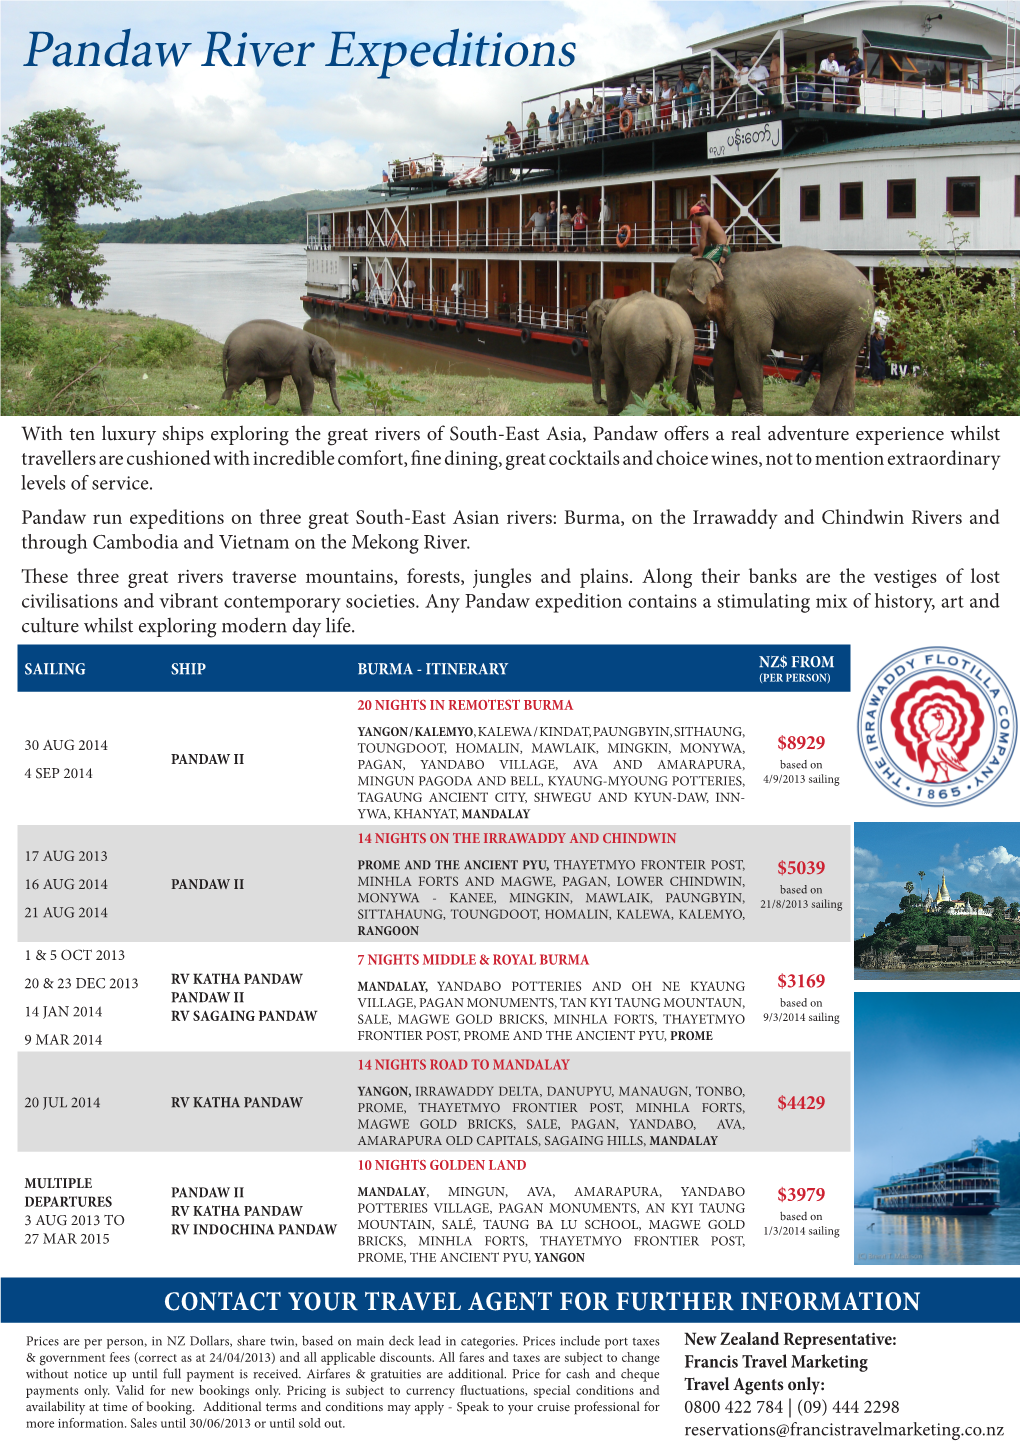 Pandaw River Expeditions